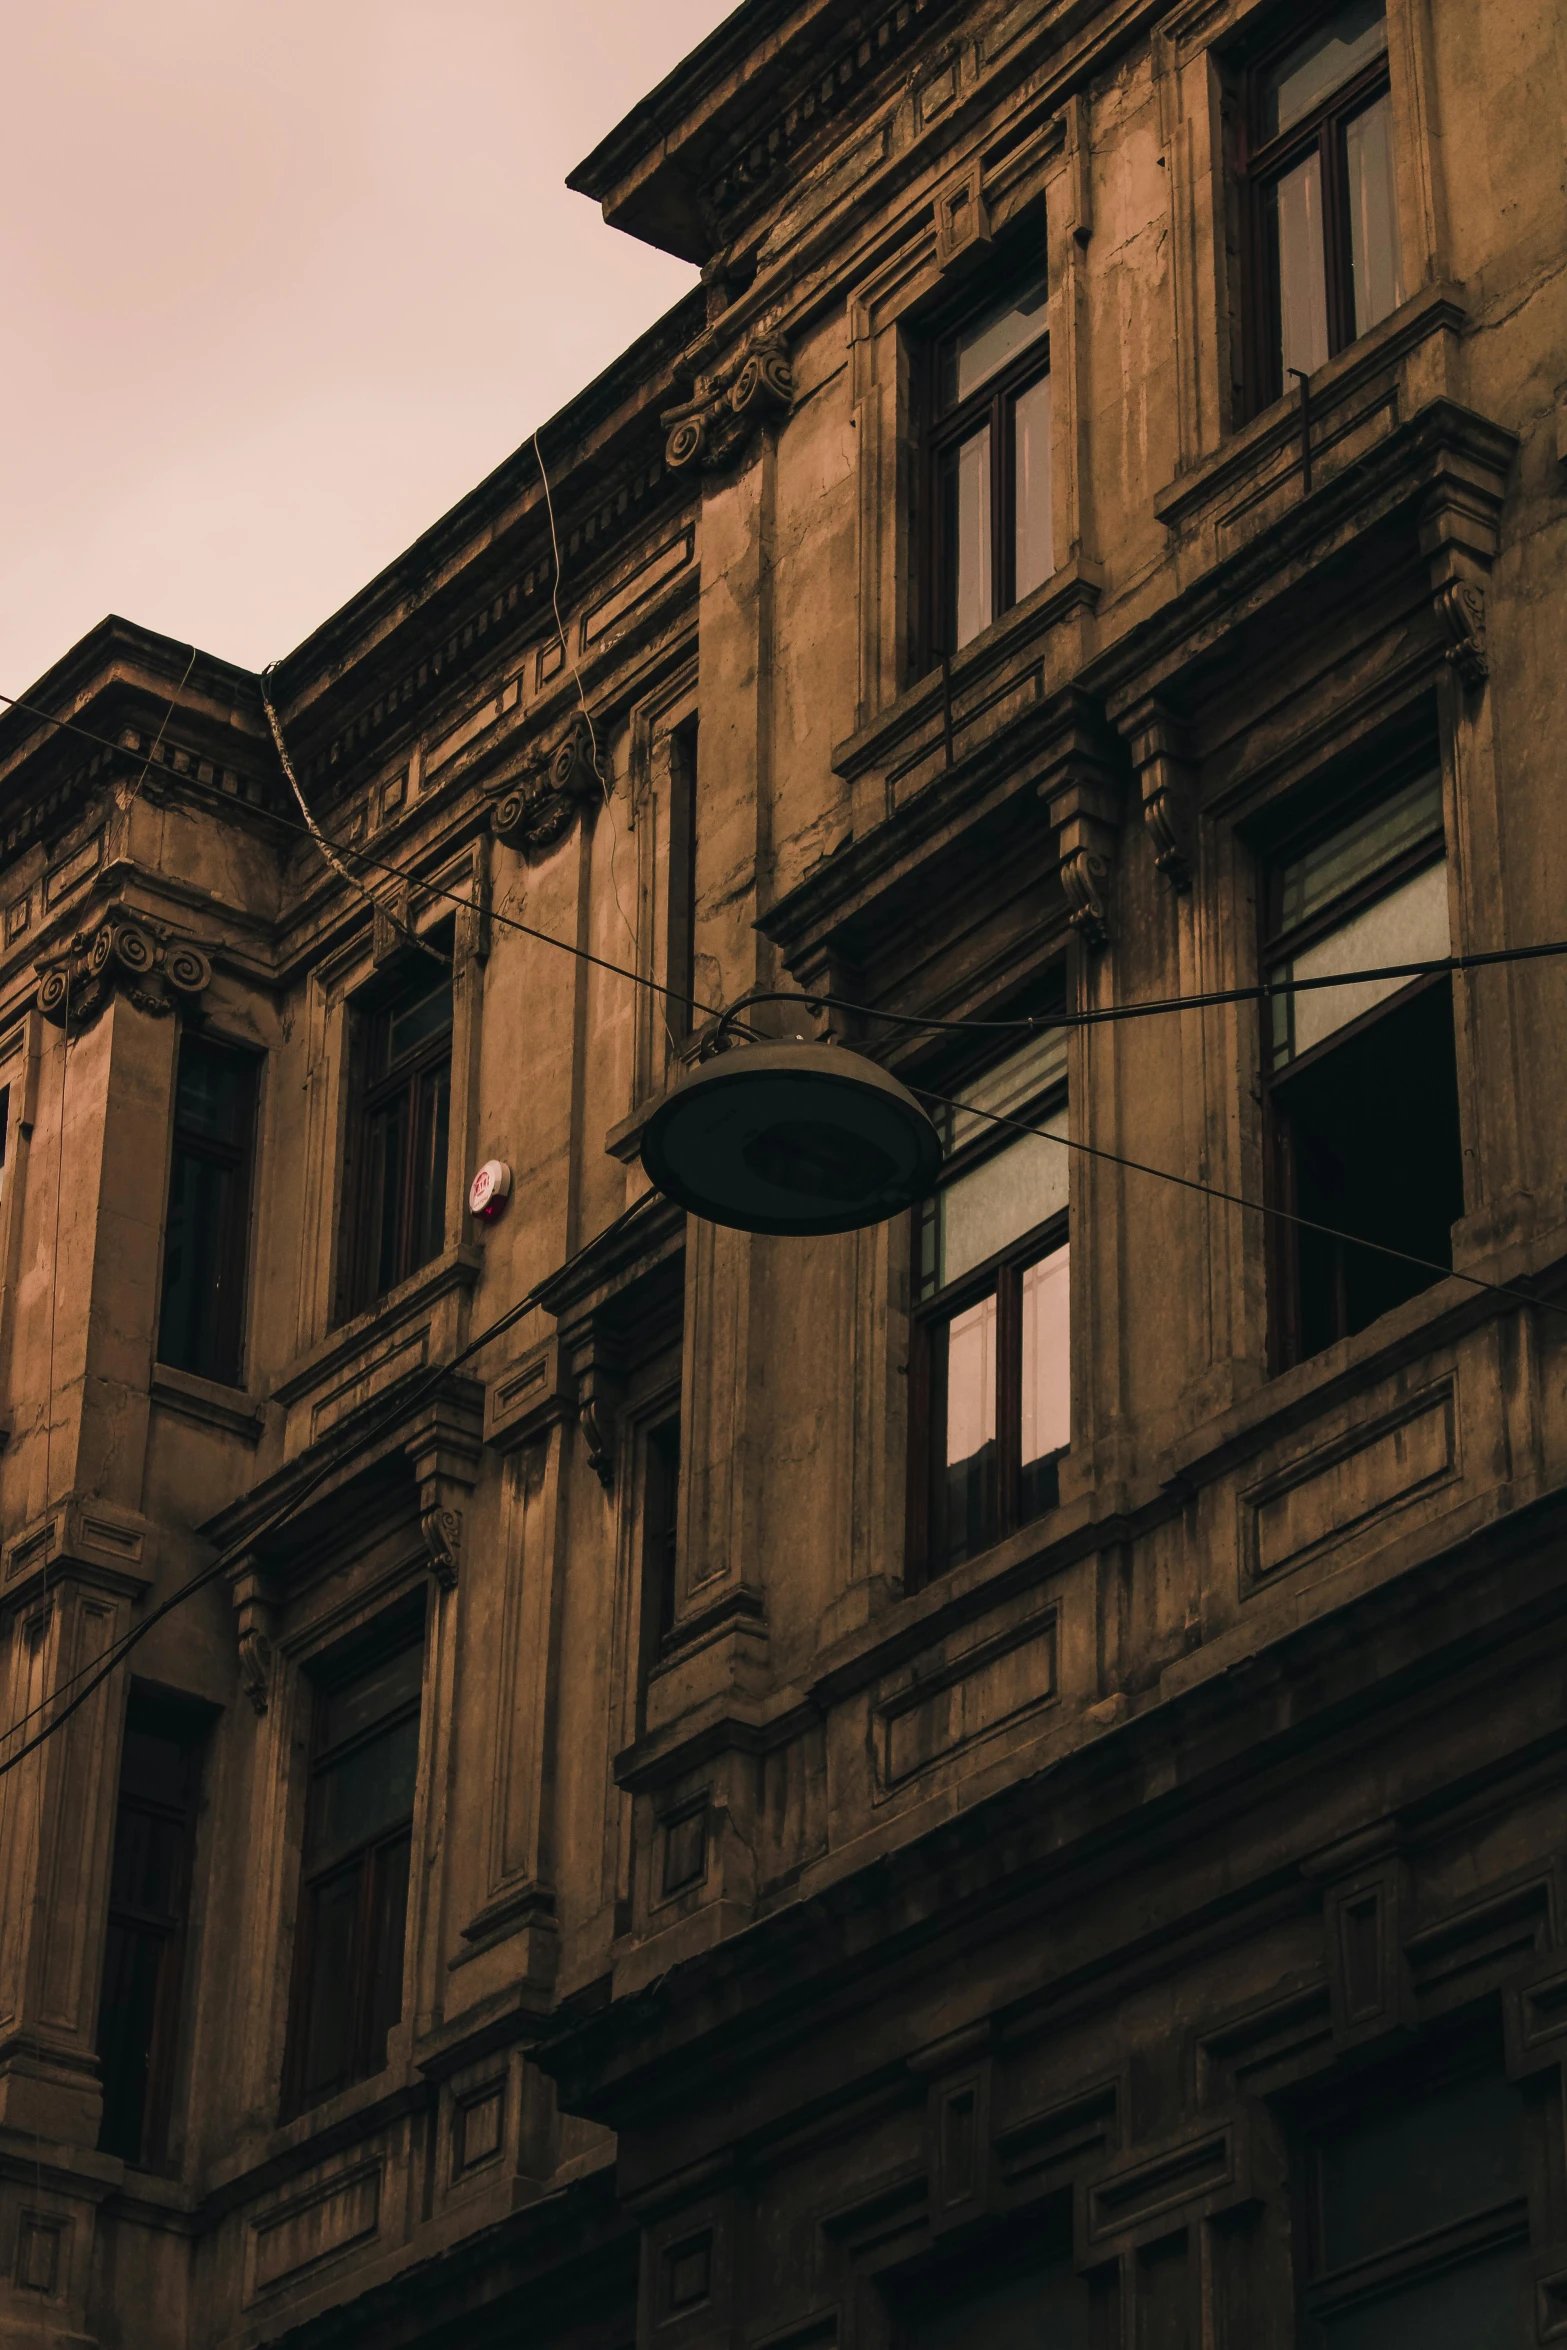 a clock that is on the side of a building, a photo, inspired by Elsa Bleda, pexels contest winner, renaissance, beige and dark atmosphere, nepali architecture buildings, late summer evening, wires hanging across windows